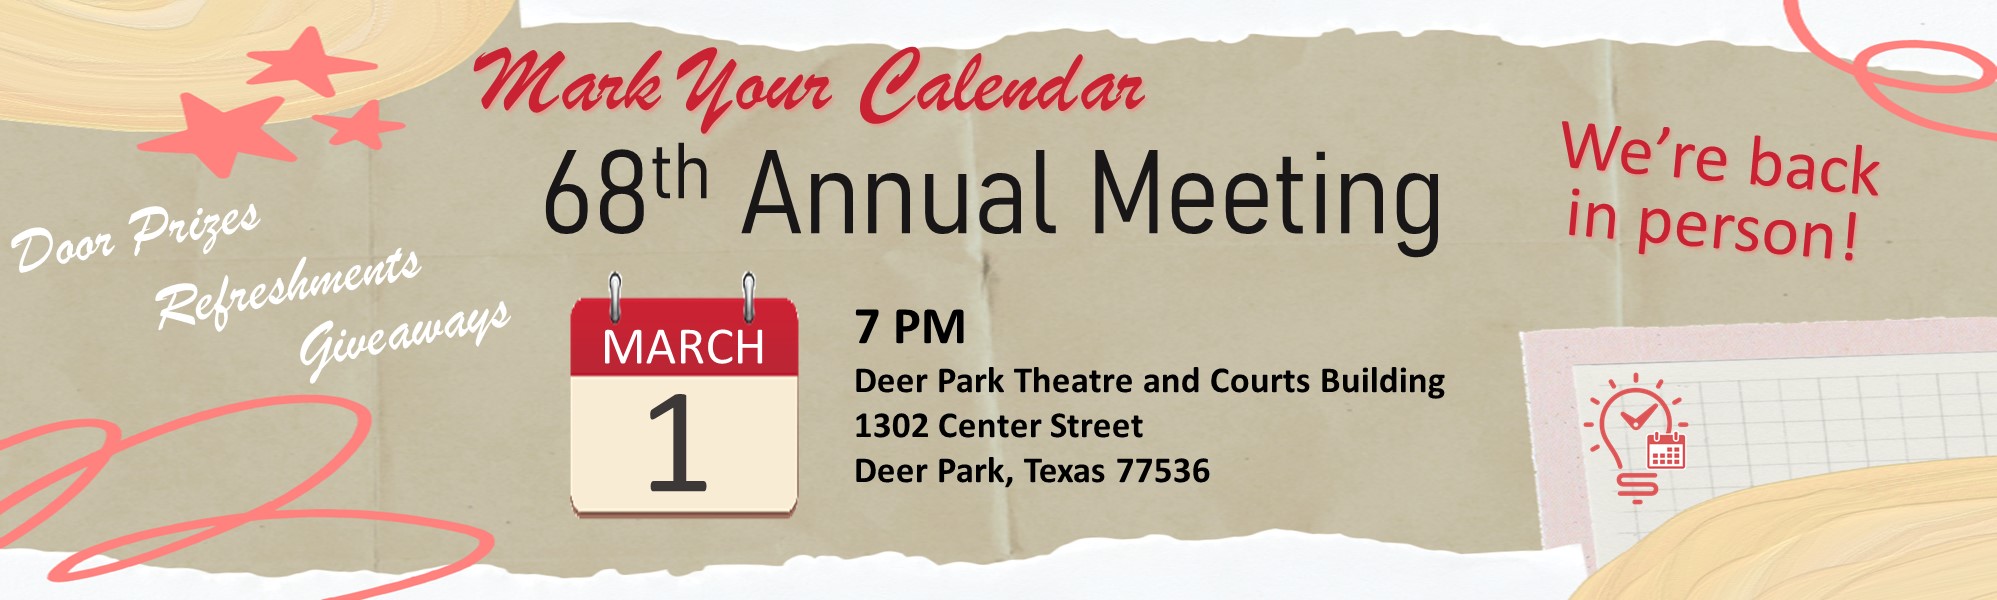 68th annual meeting. March 1st at 7pm at the Deer Park theatre and courts building. 